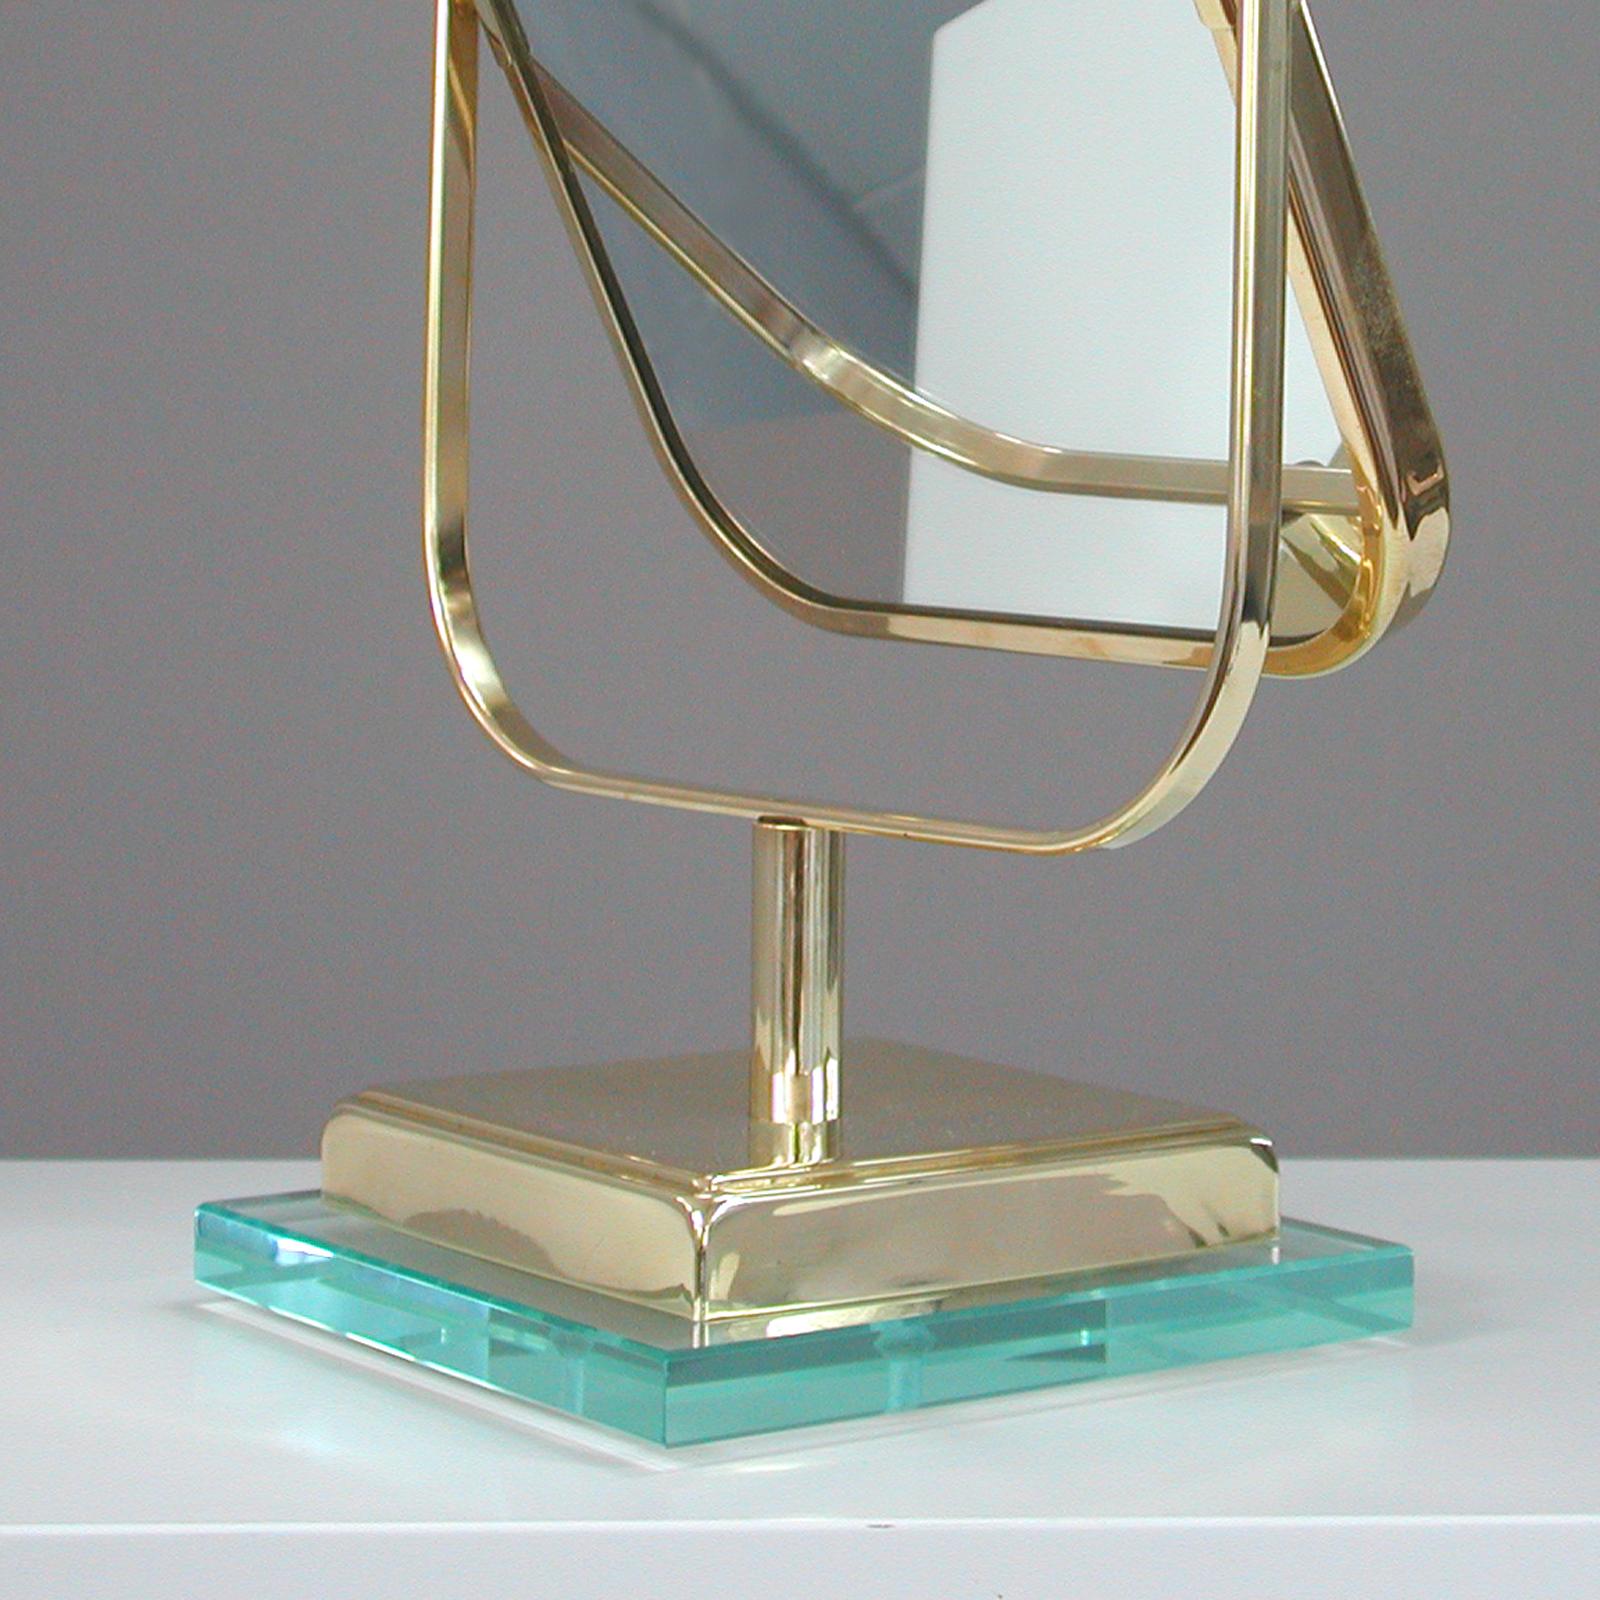 Italian Brass and Glass Double Sided Table Mirror 1950s, Fontana Arte Style 3